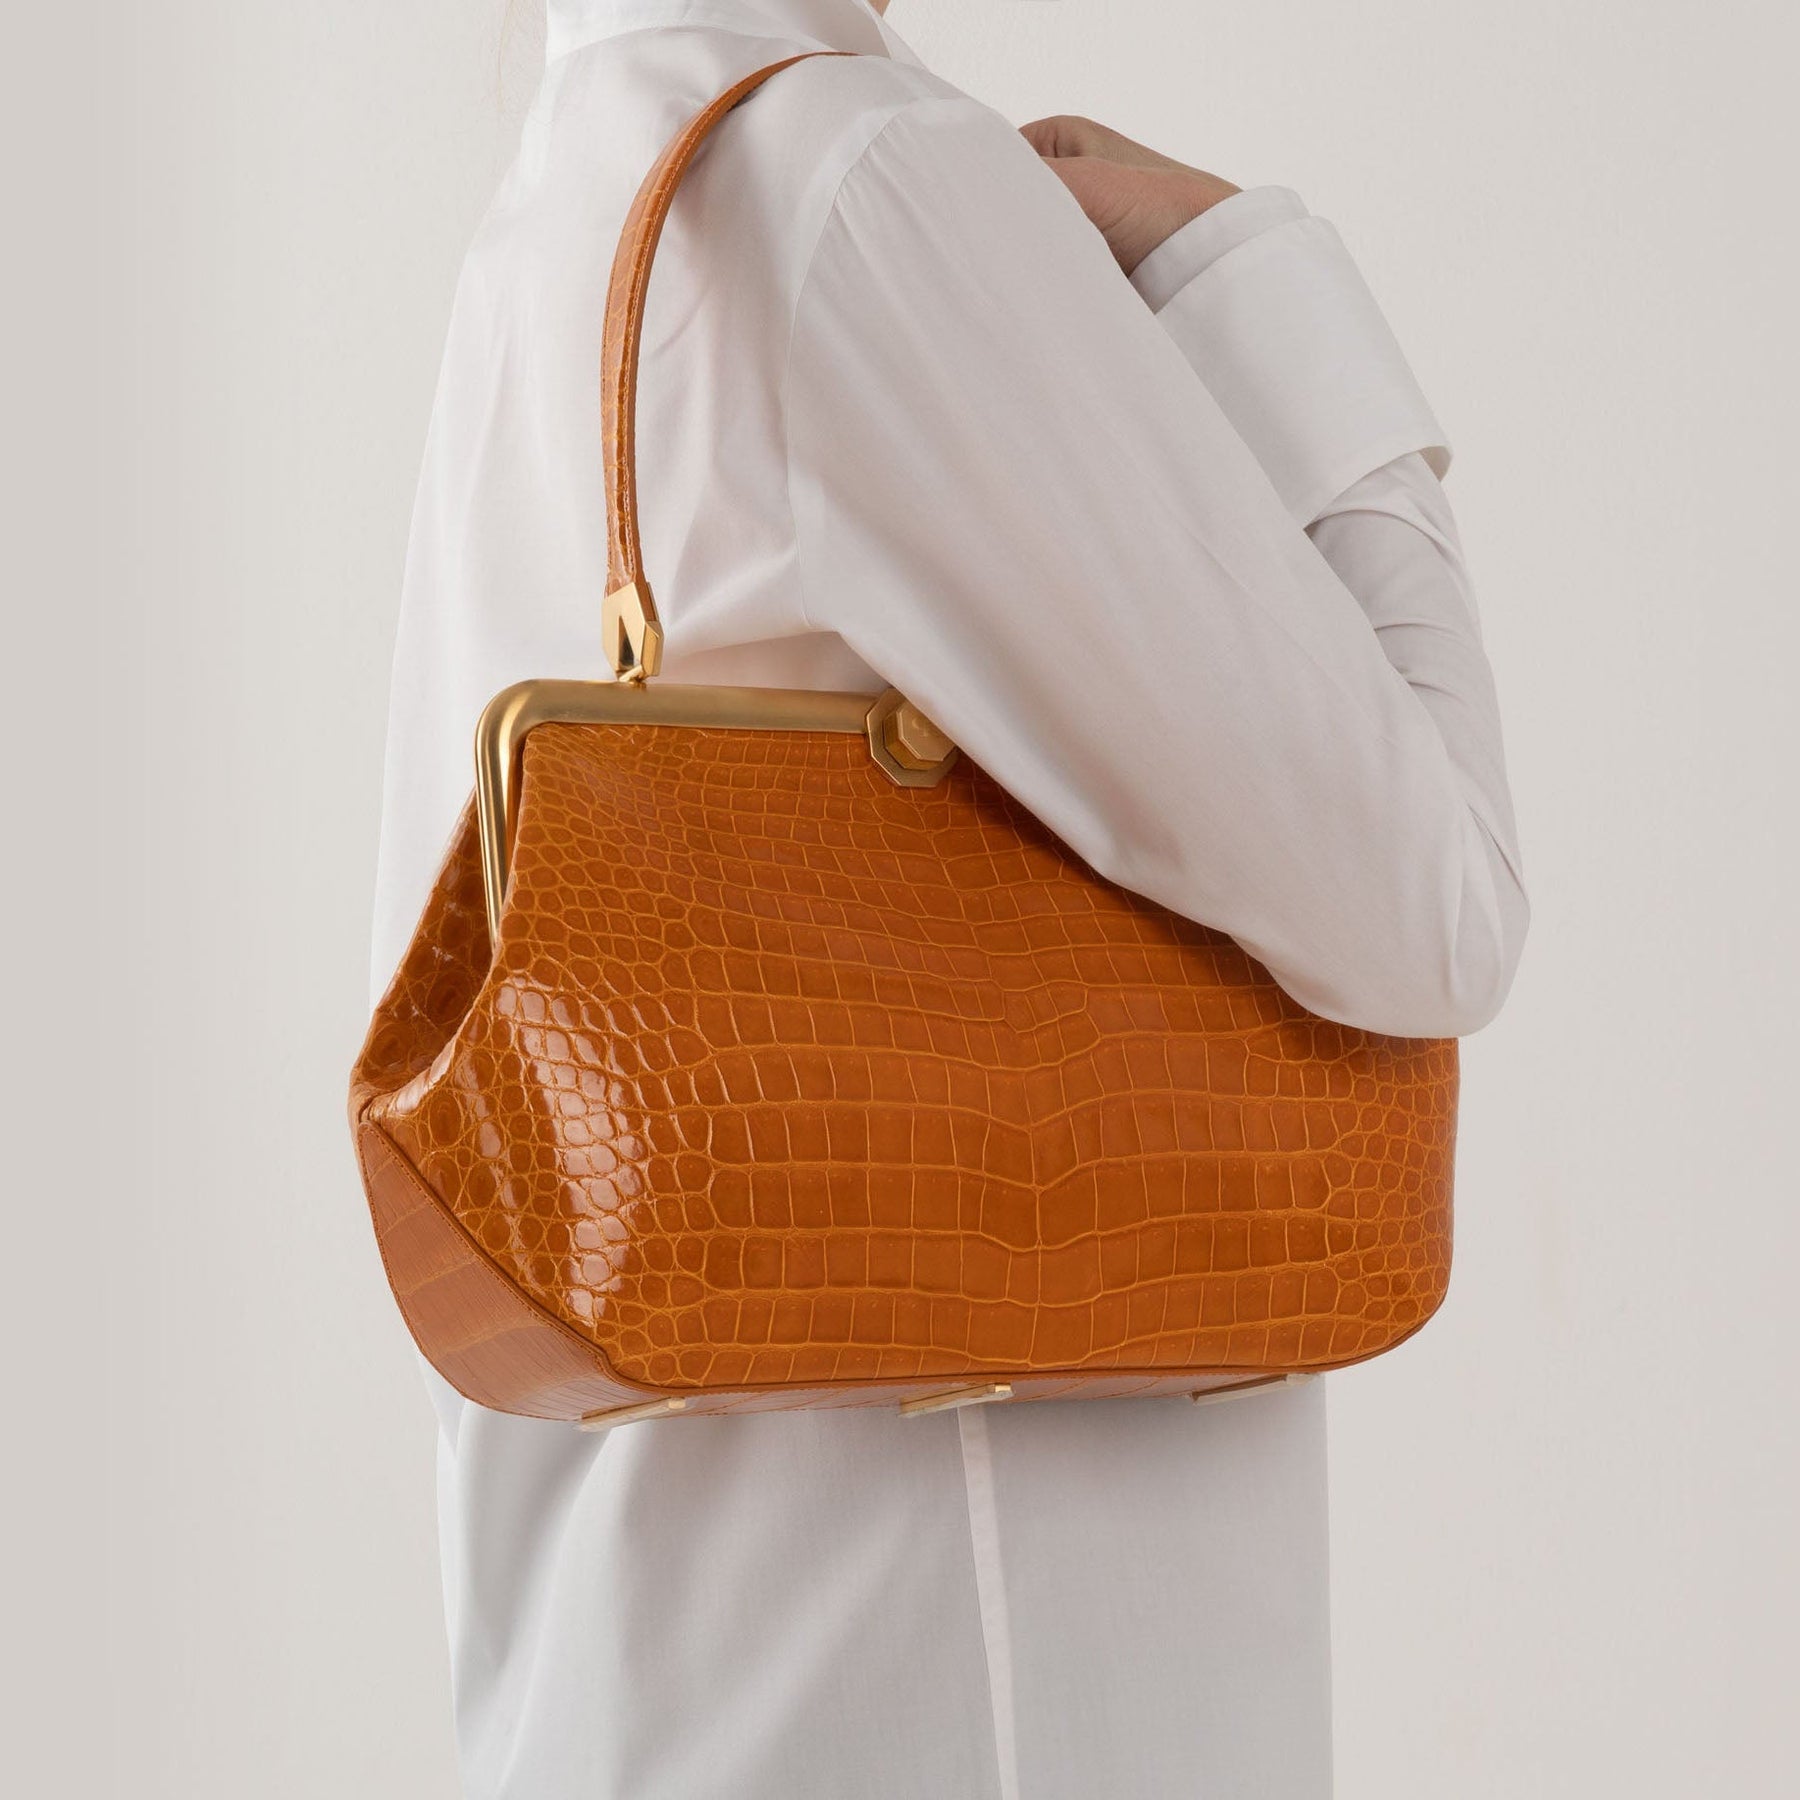 DOTTI Luxury handbags in exotic skins. Luna in crocodile with model. Made in Italy